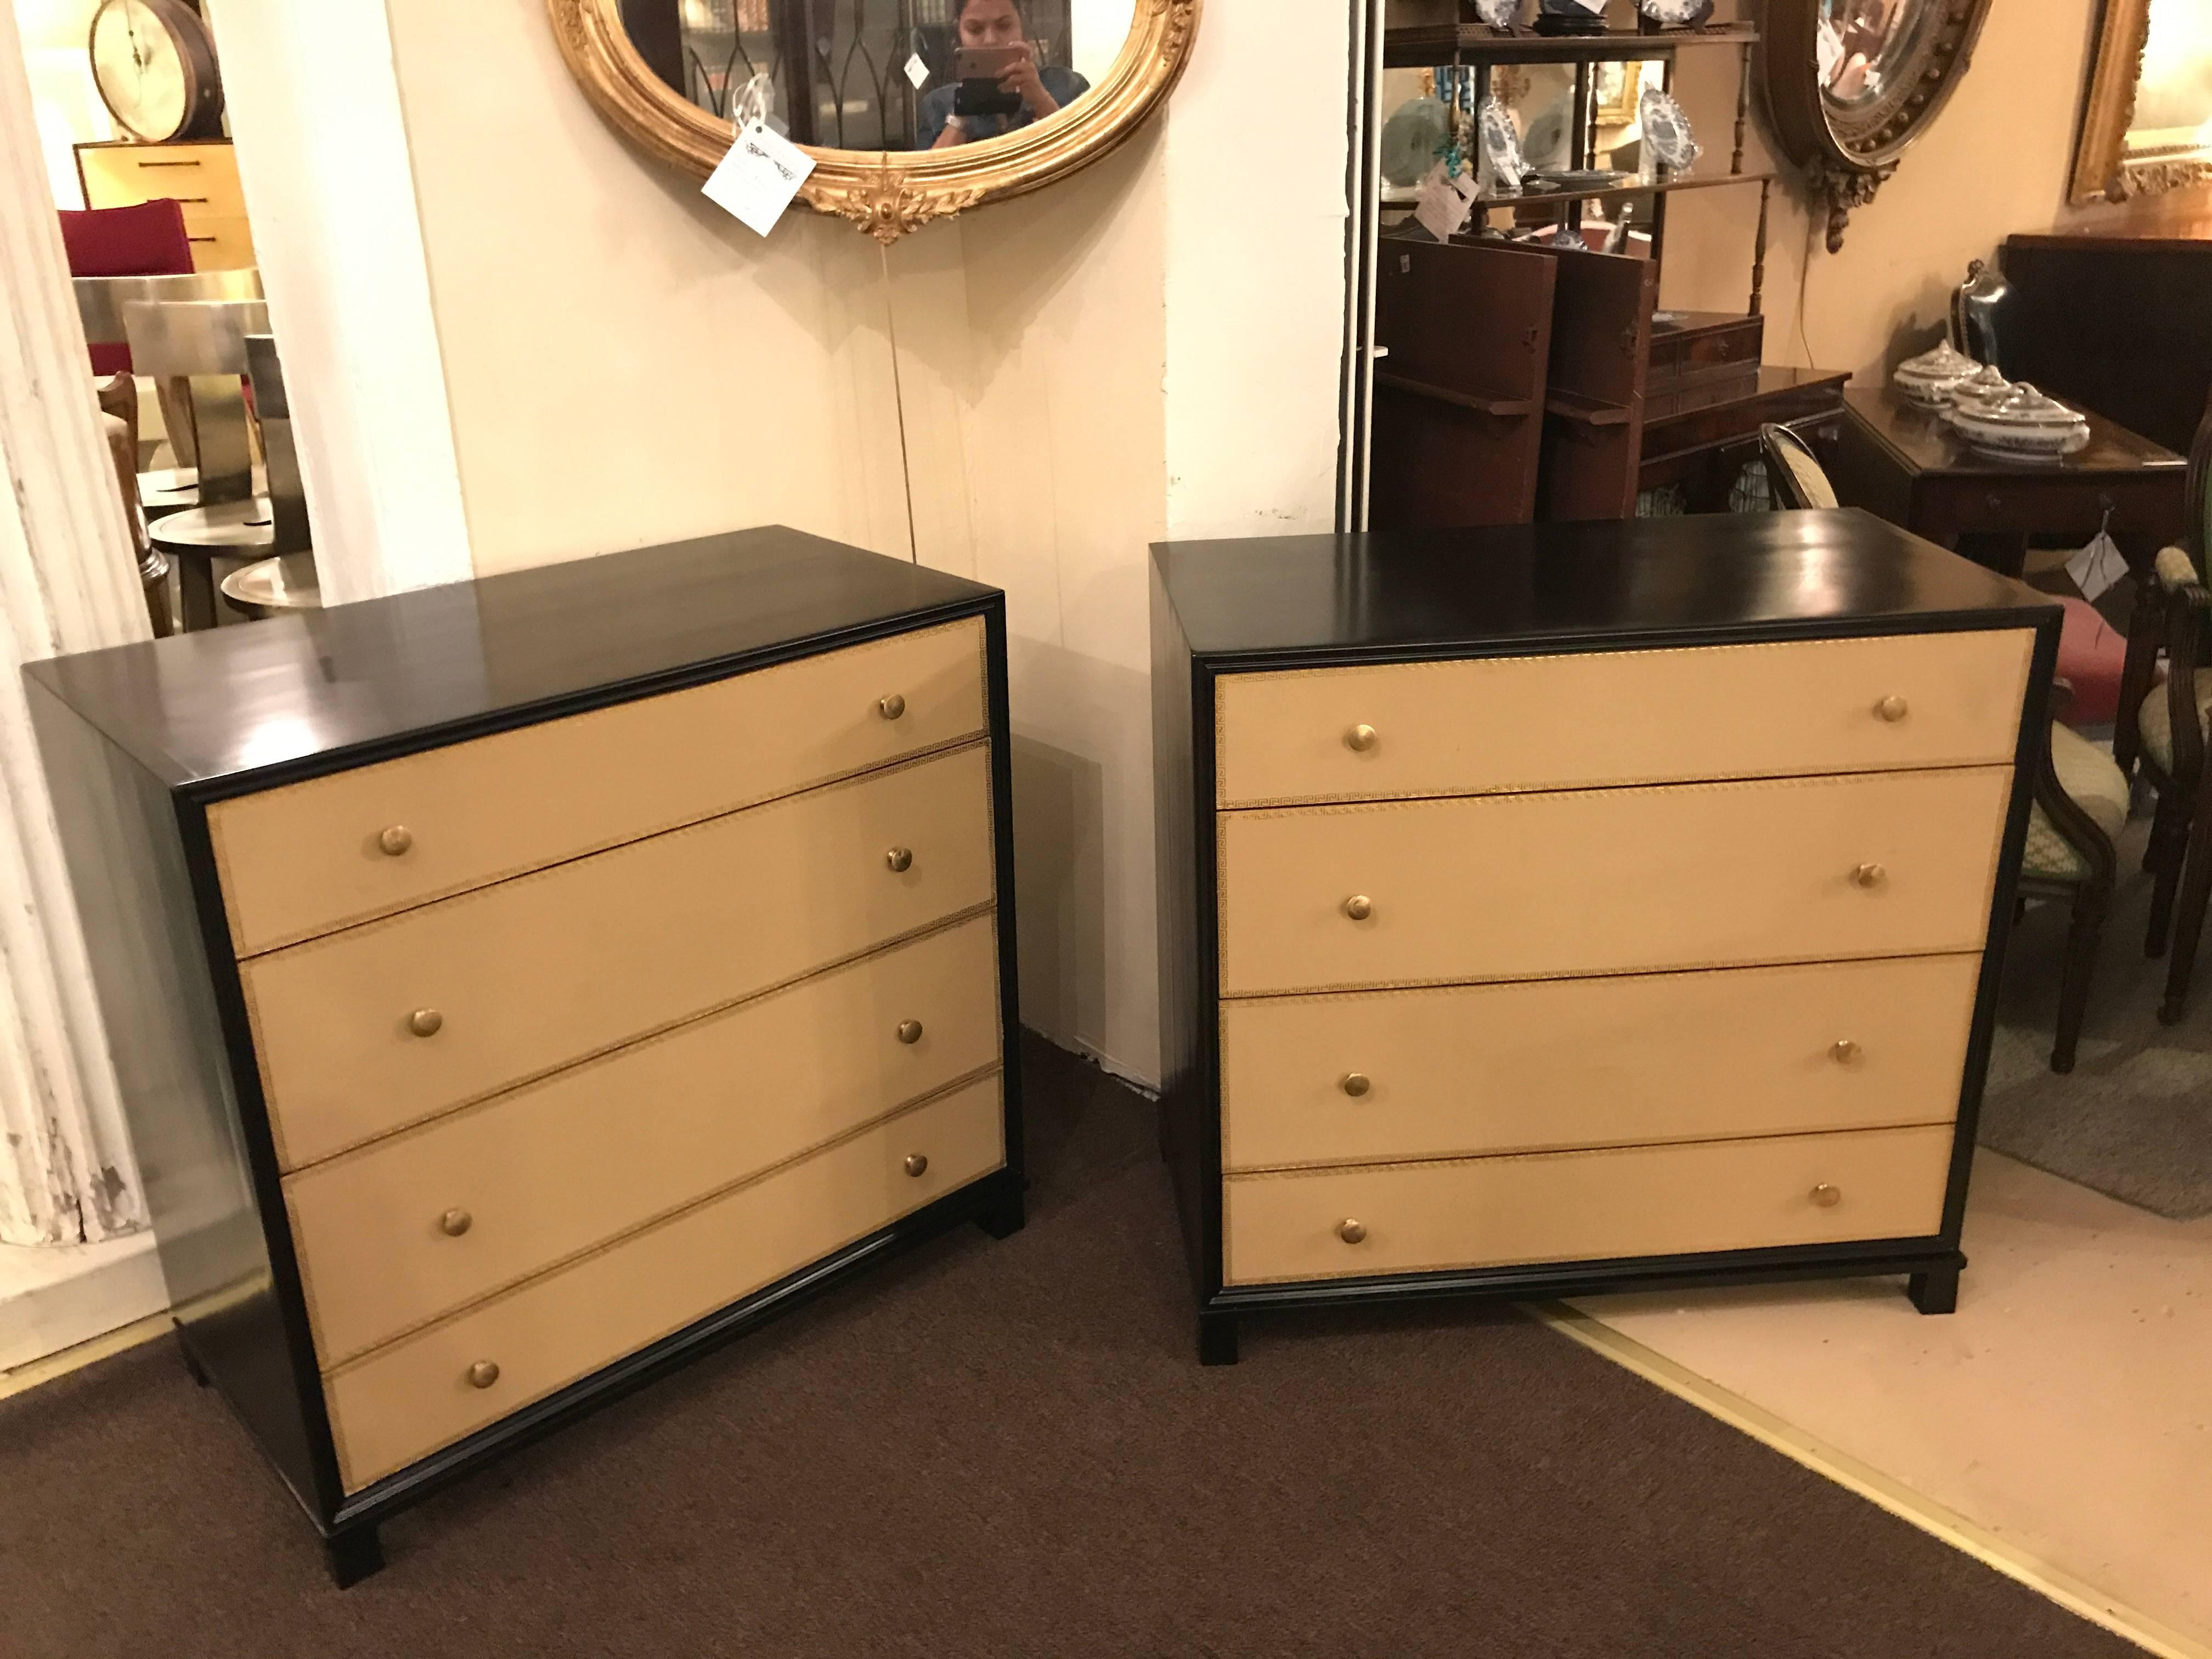 A pair of Hollywood Regency style Tommi Parzinger fashioned four-drawer leather front with Greek key design chests. Each have a pair of large centre drawers with smaller drawers on the top and bottom in a tan leather with gilt gold Greek key design.